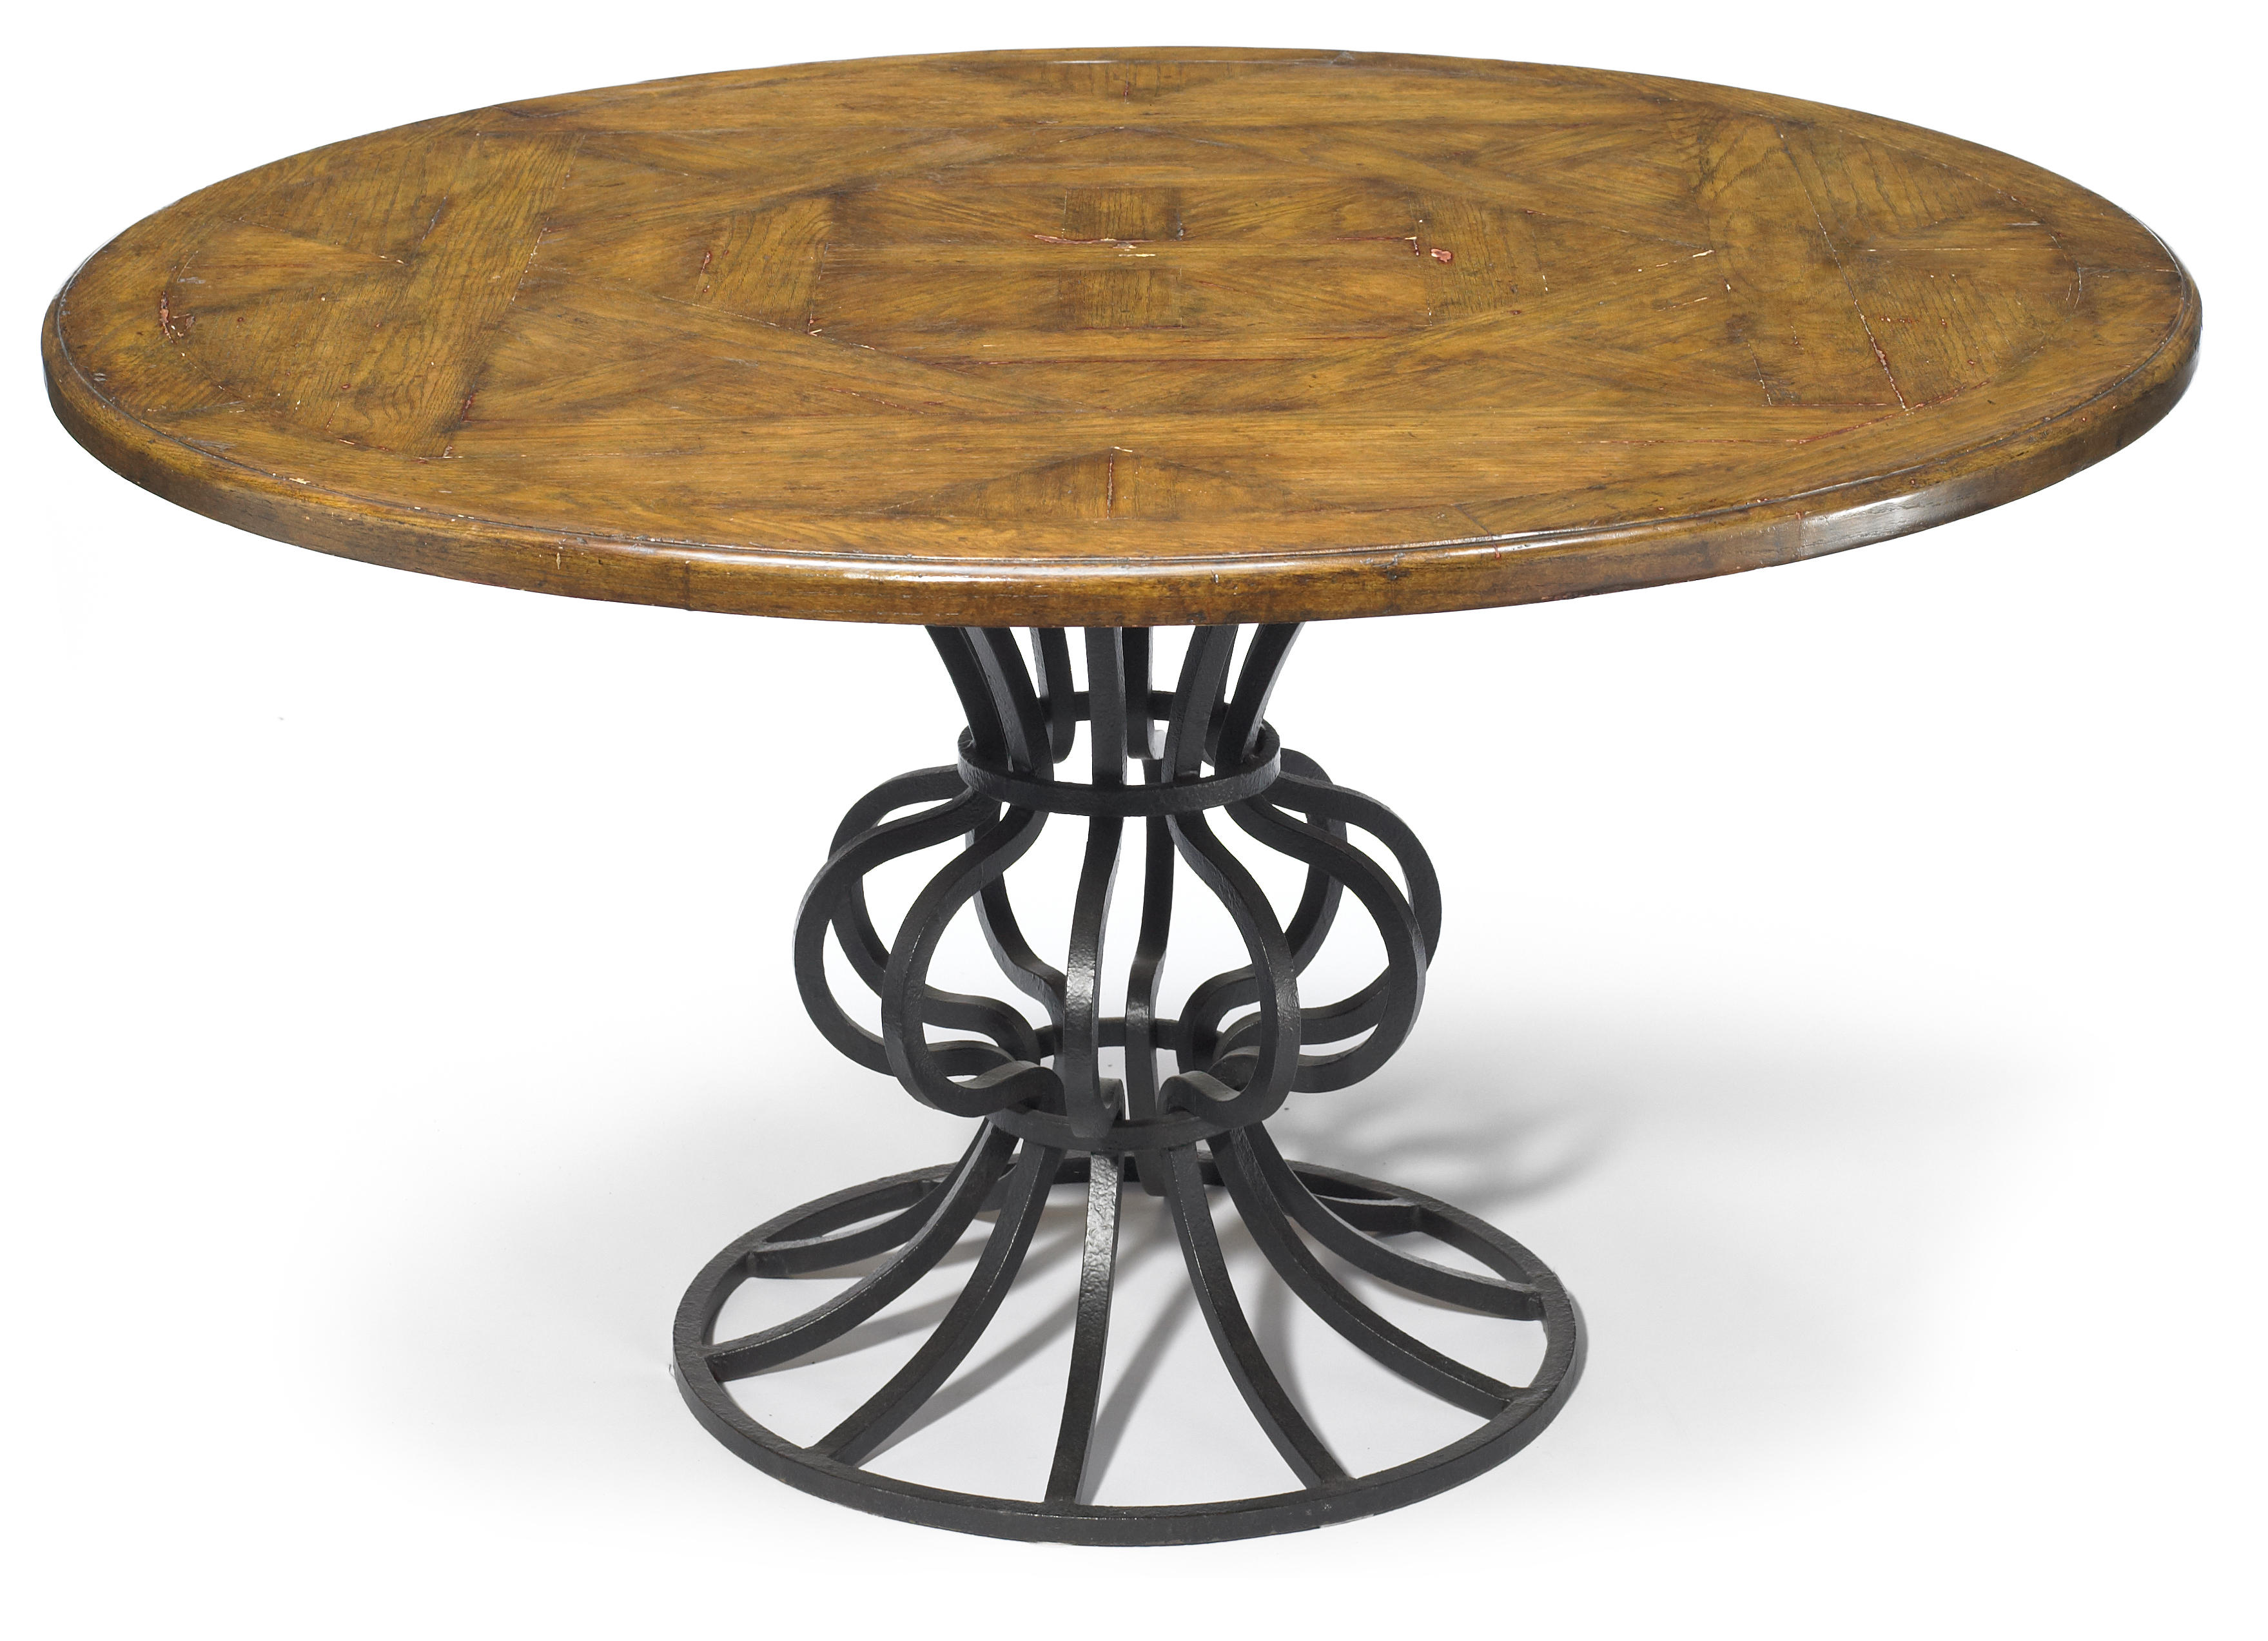 A wrought iron and oak center table